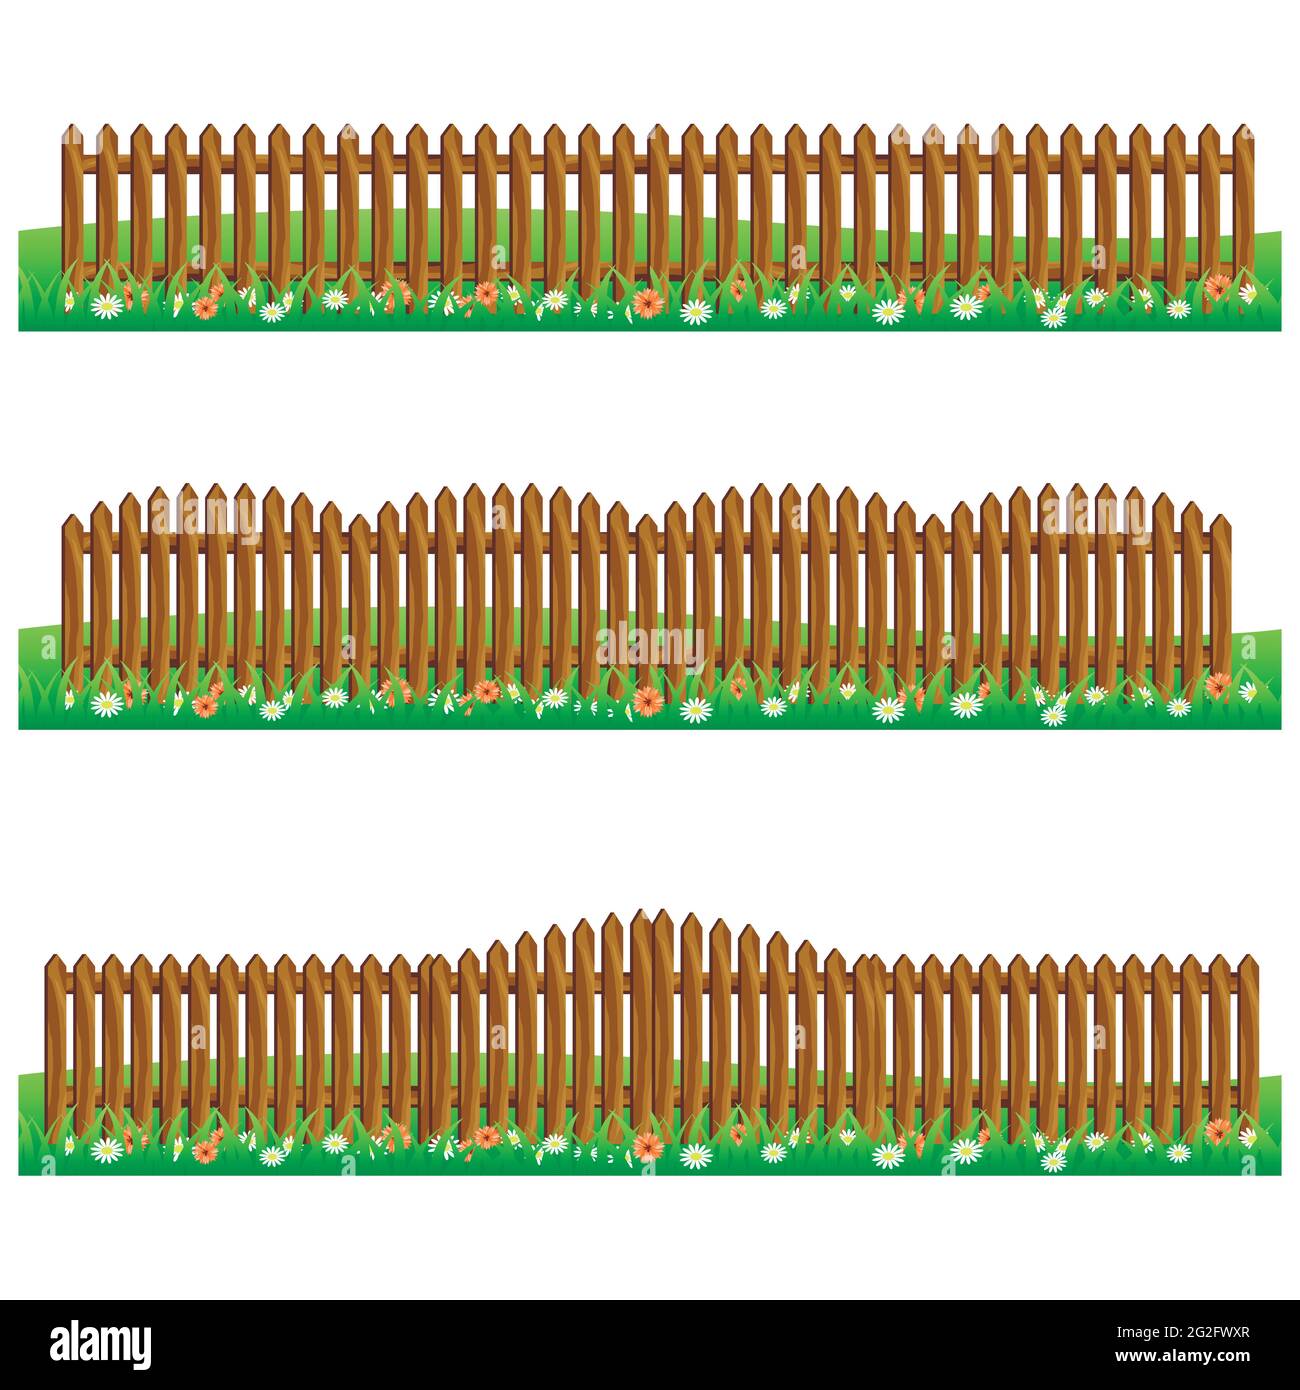 Set of farm wooden fences isolated on white background with grass and flowers.Fits as scene elements for cartoon or game asset. Vector illustration. Stock Vector